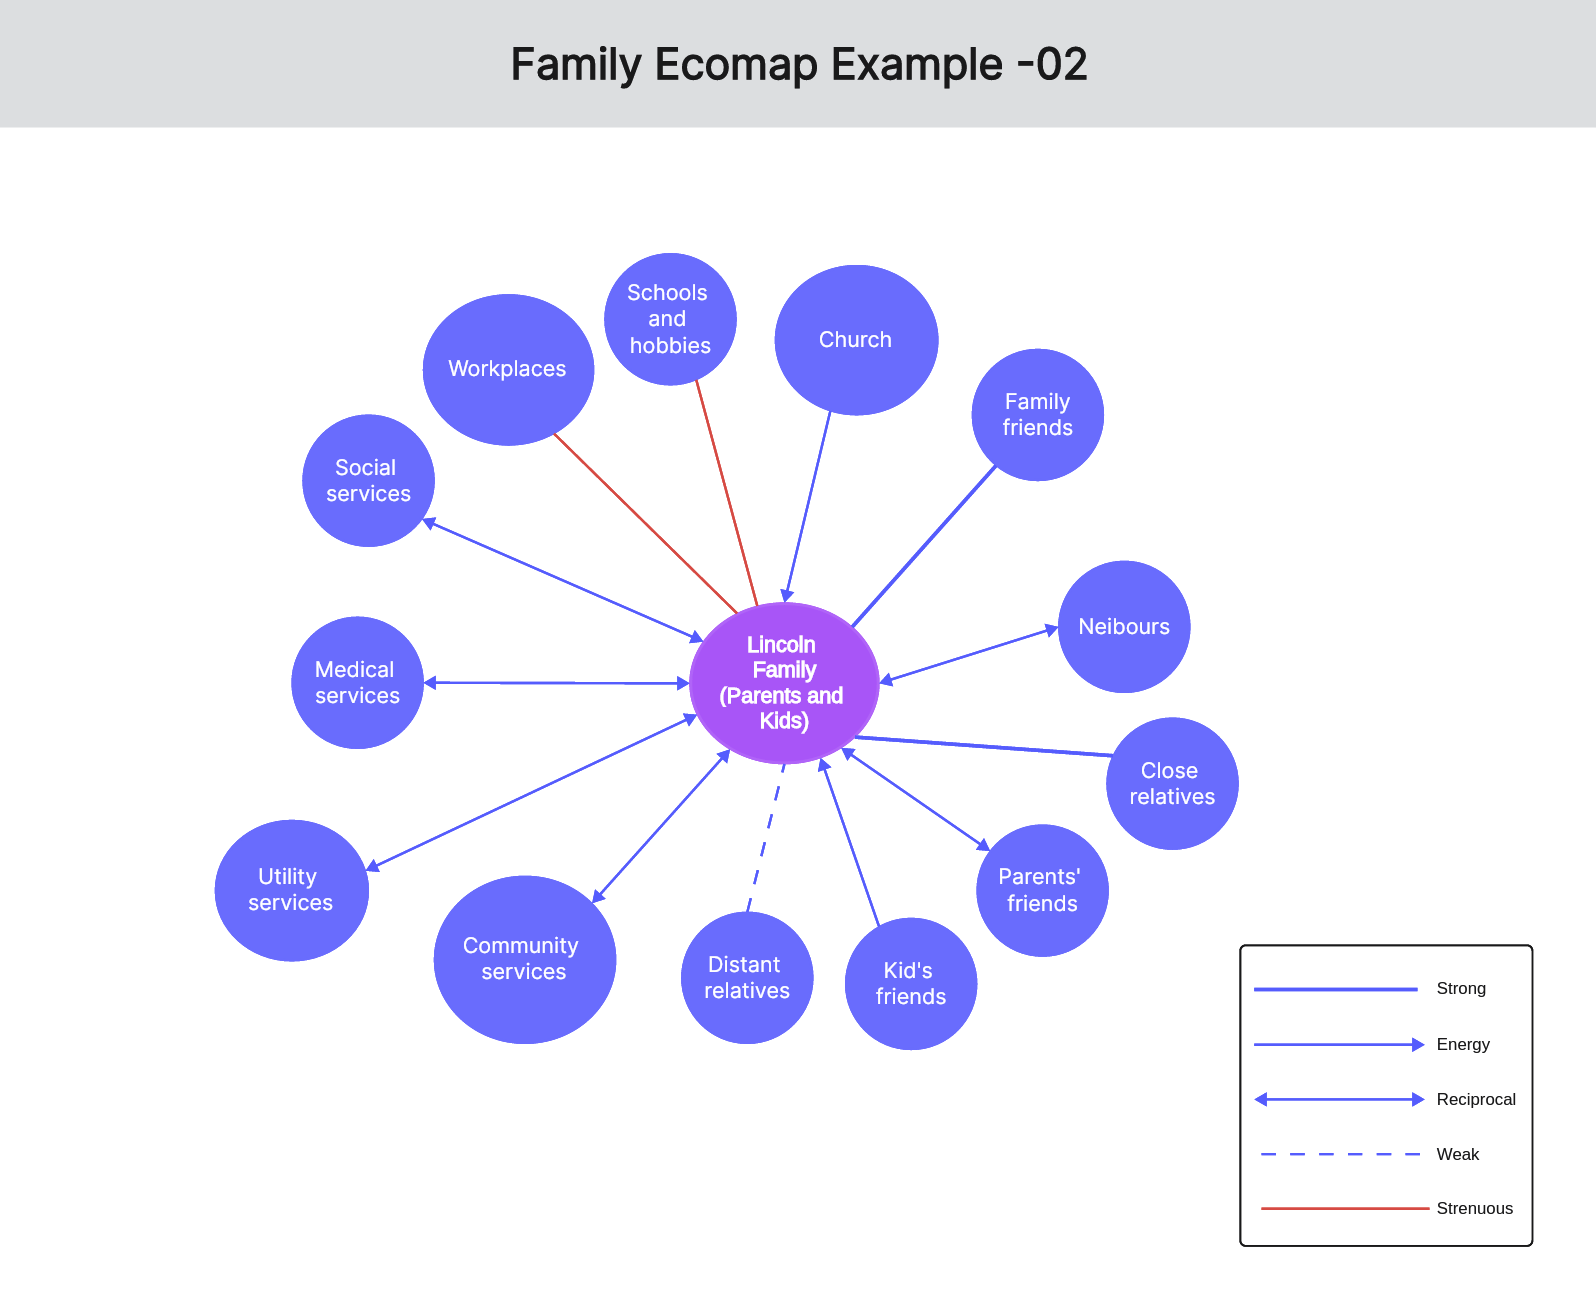 family-ecomap-examples-02